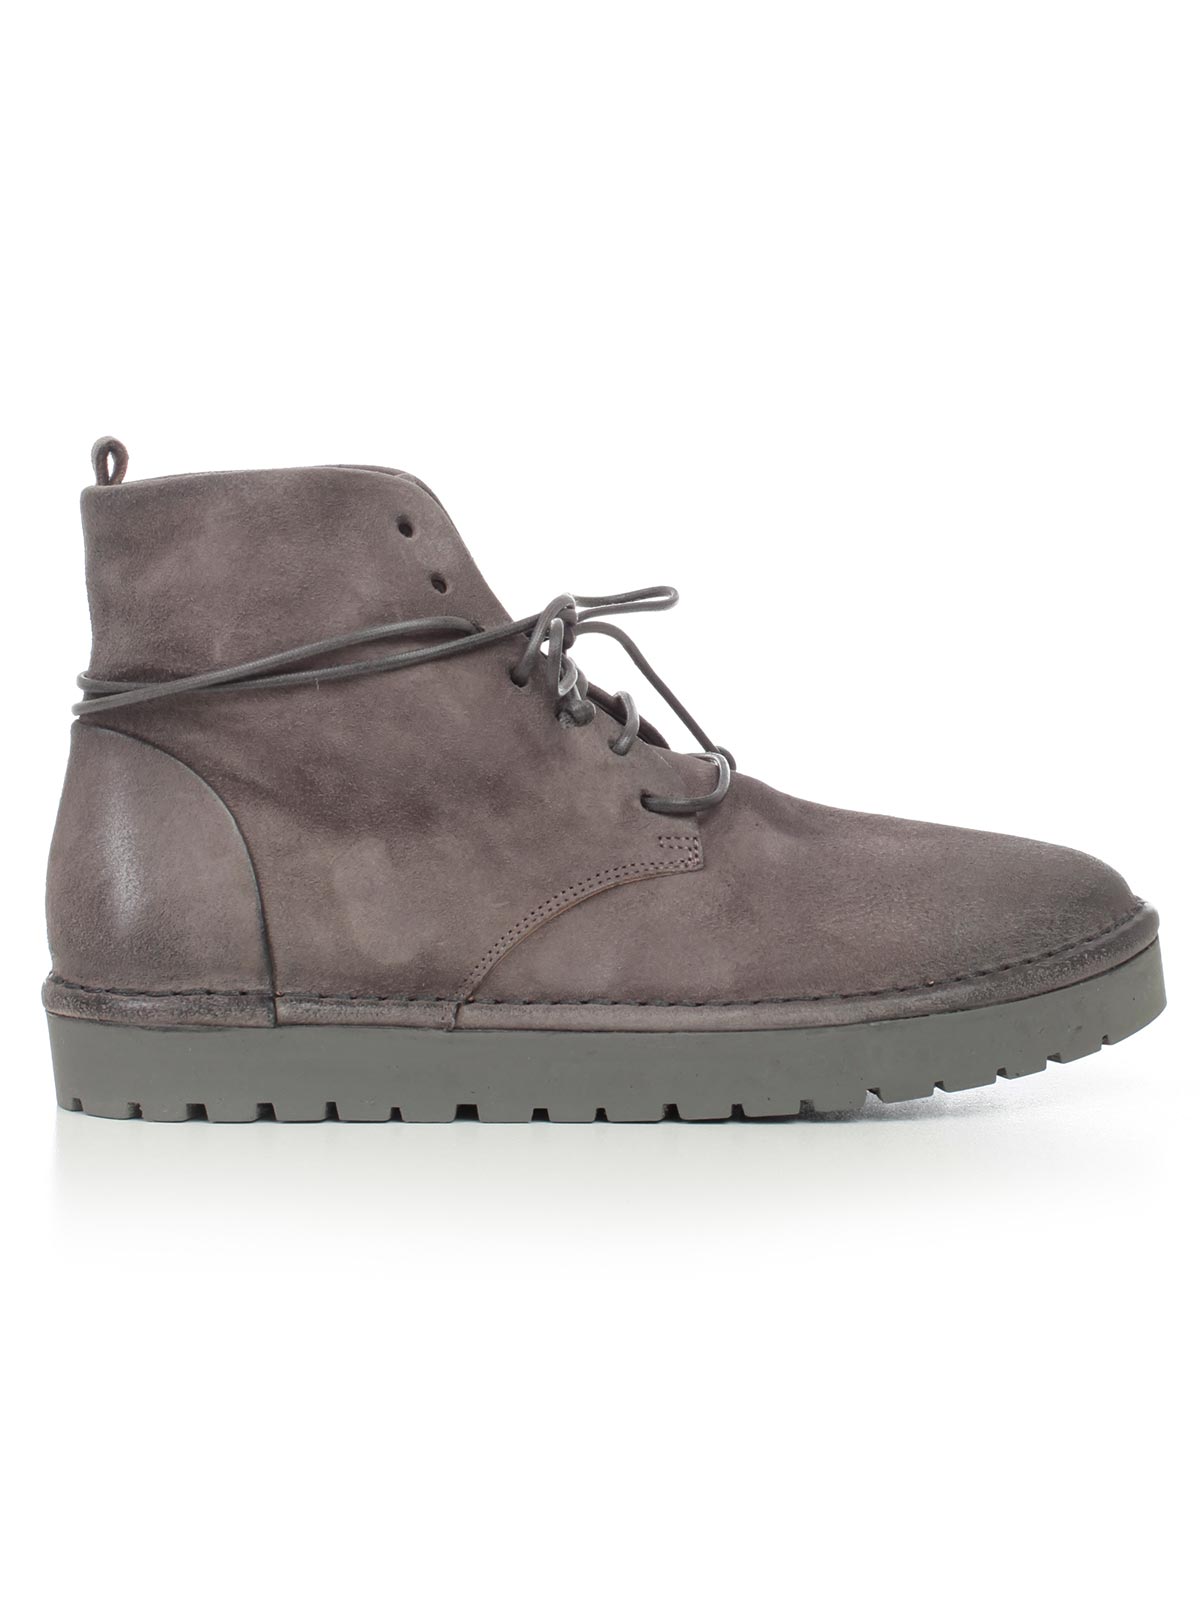 marsell shoes online